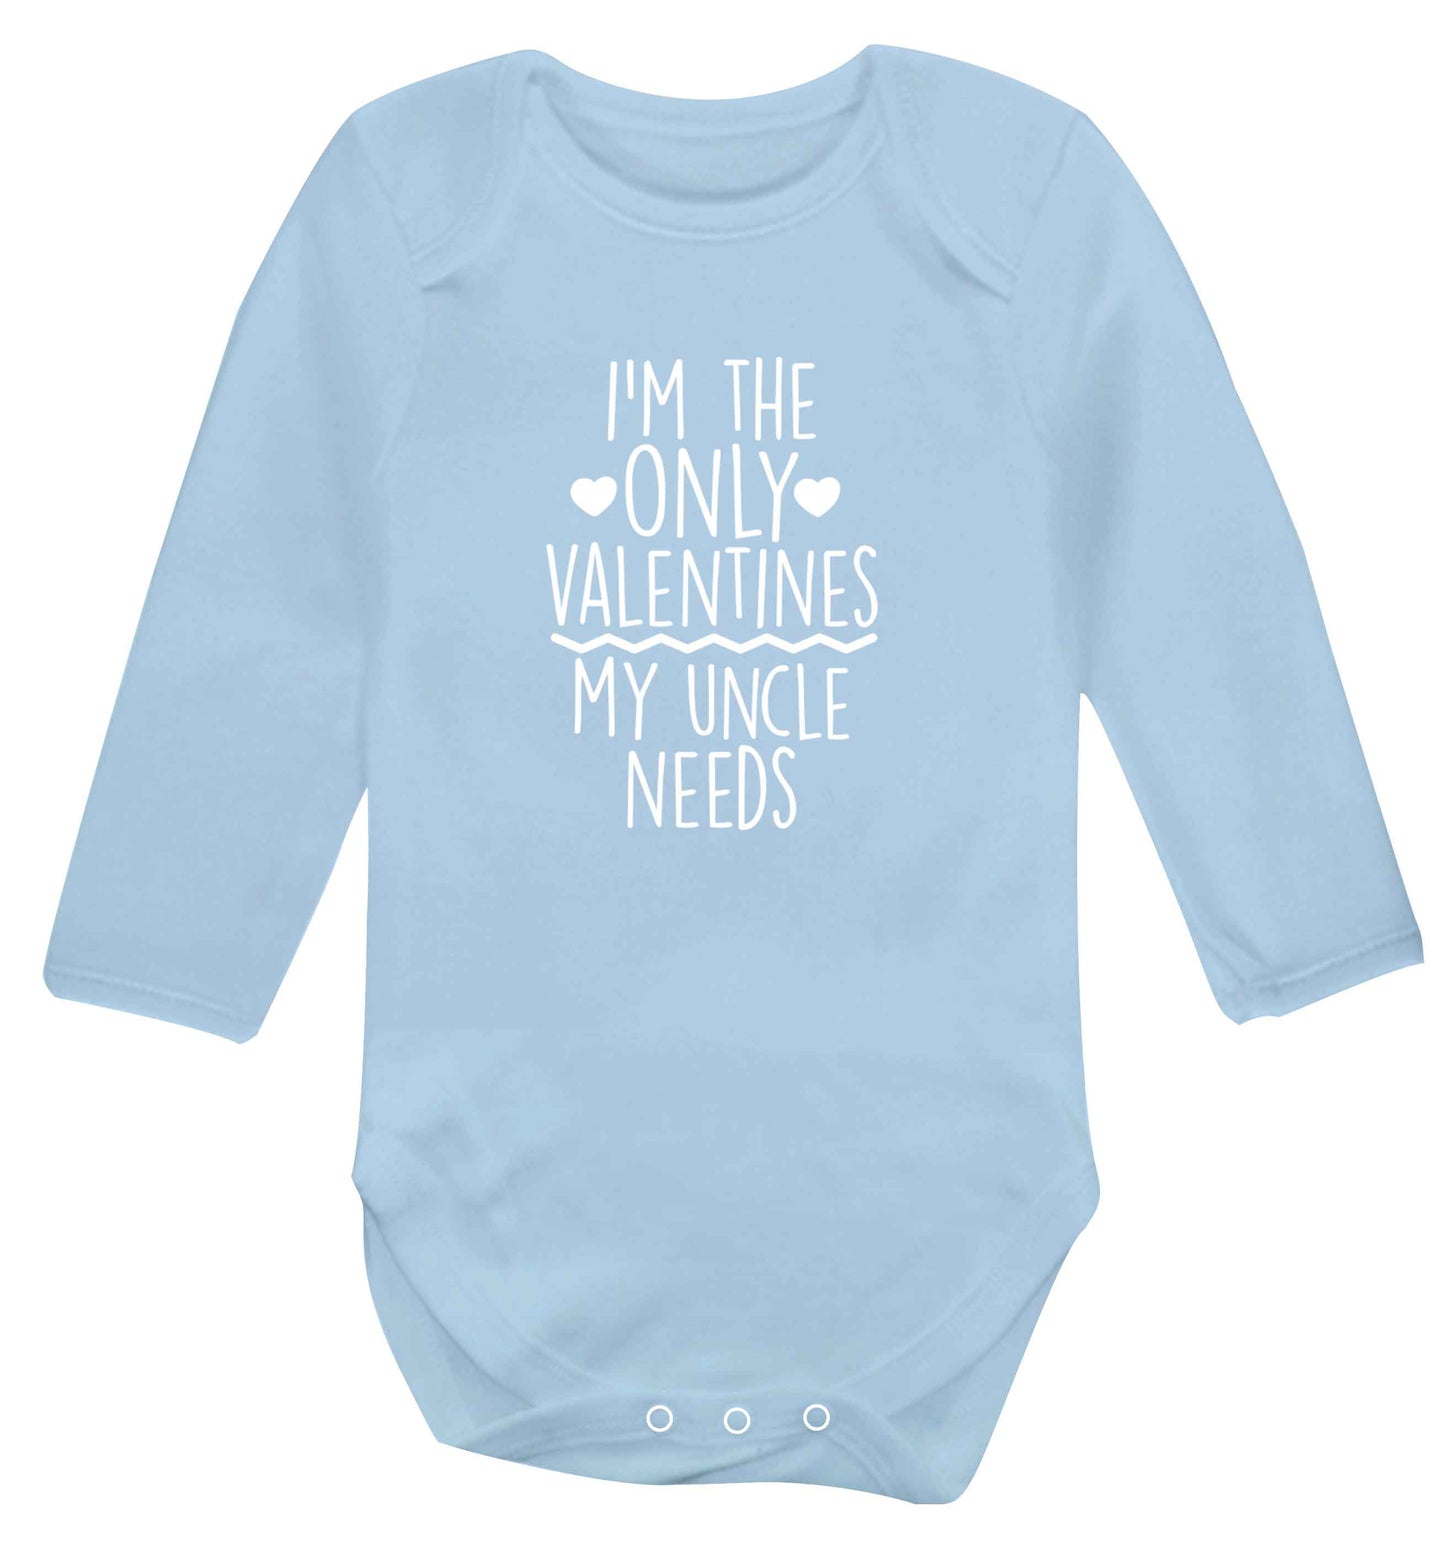 I'm the only valentines my uncle needs baby vest long sleeved pale blue 6-12 months